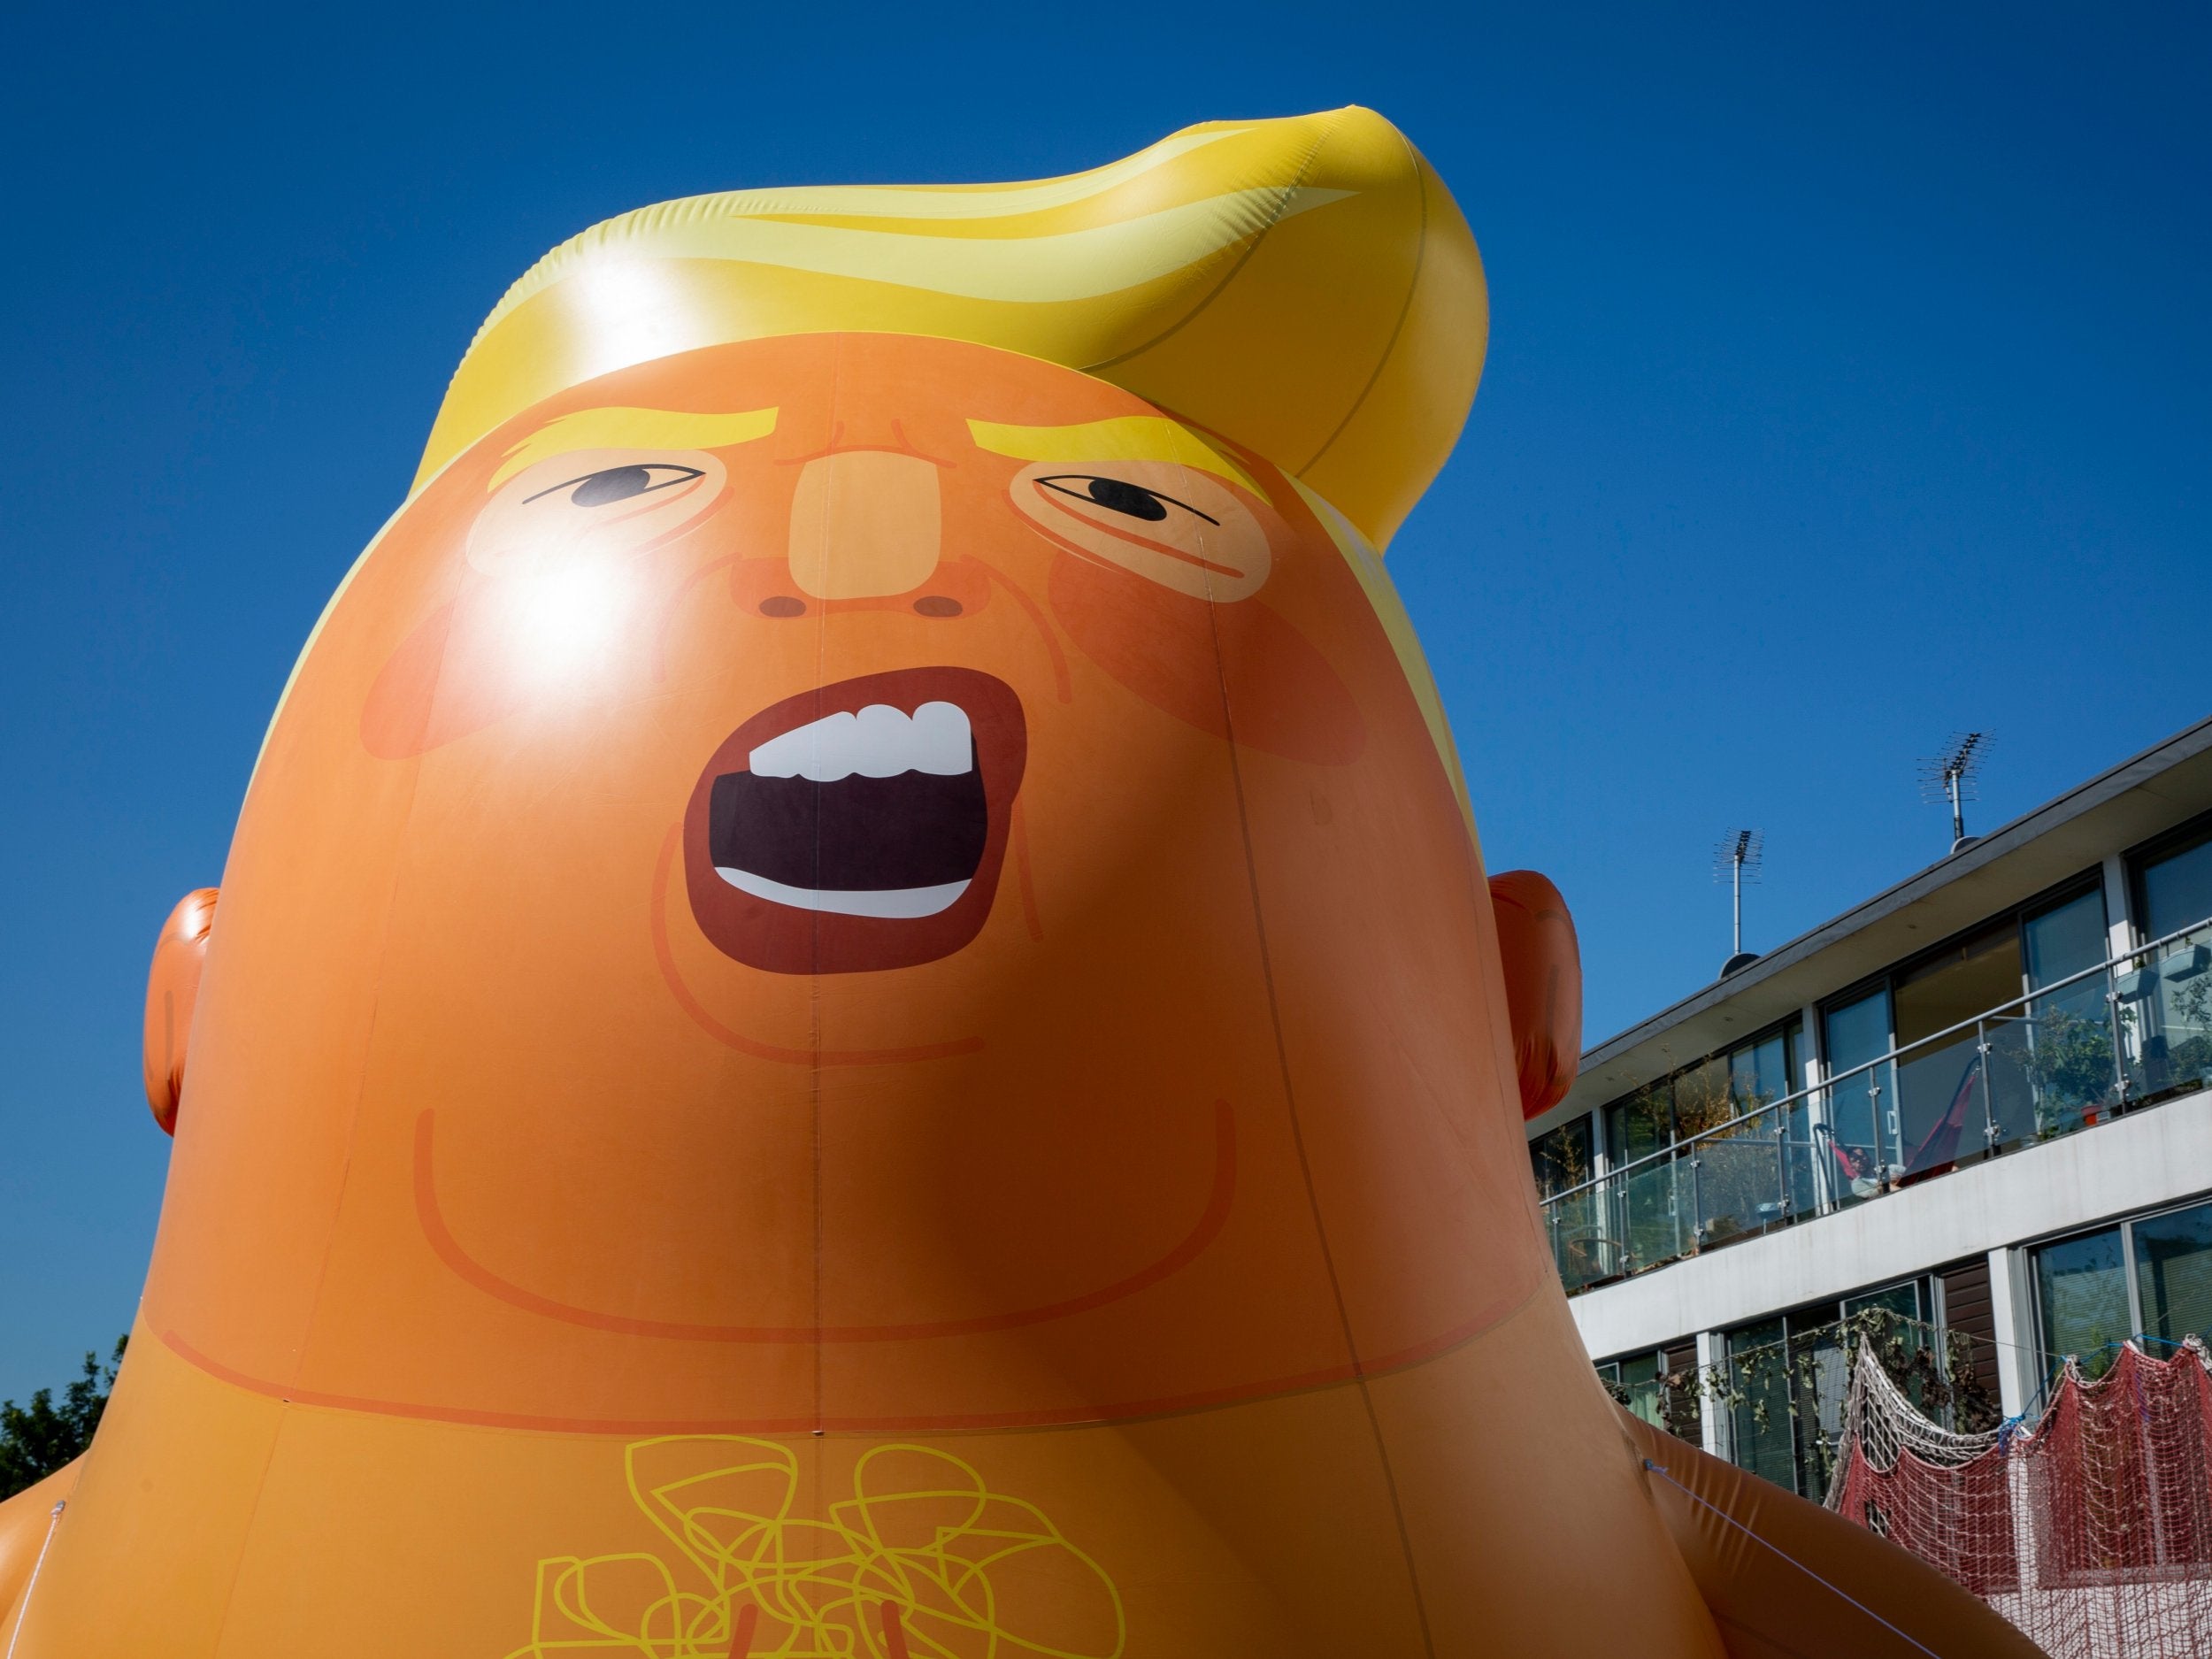 Over 10,000 people signed a petition asking for the inflatable to be allowed to fly